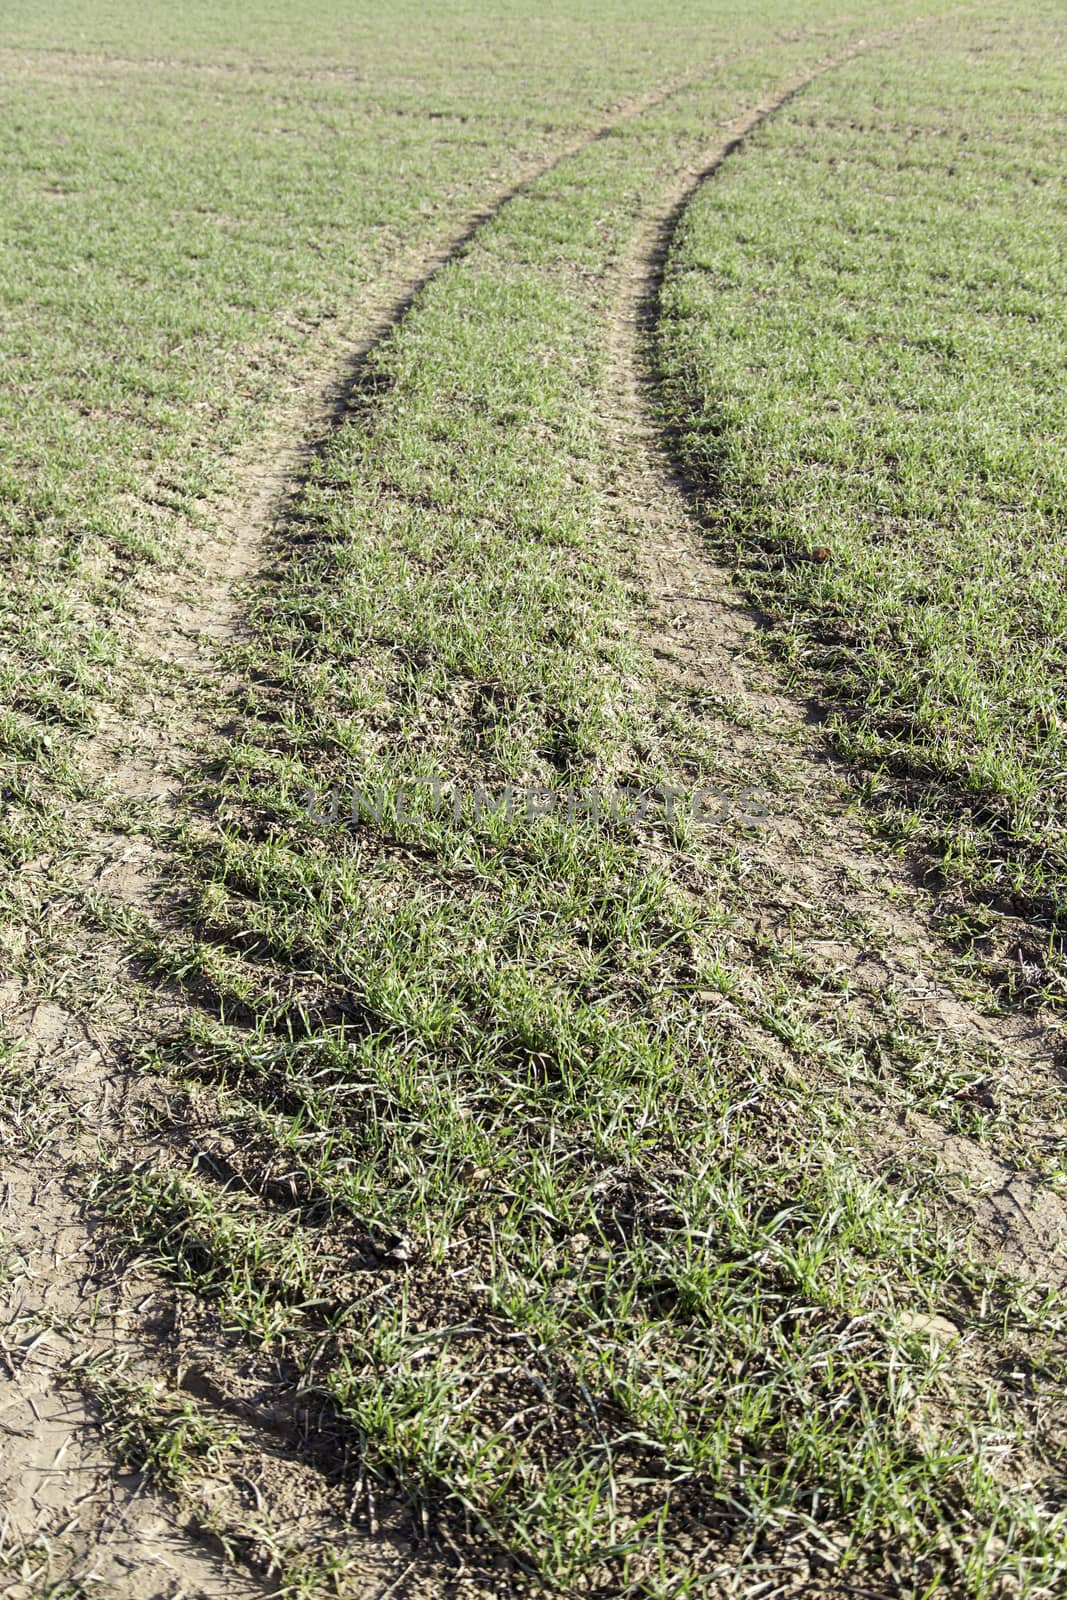 Tire marks in the grass, detail of footprints in the field